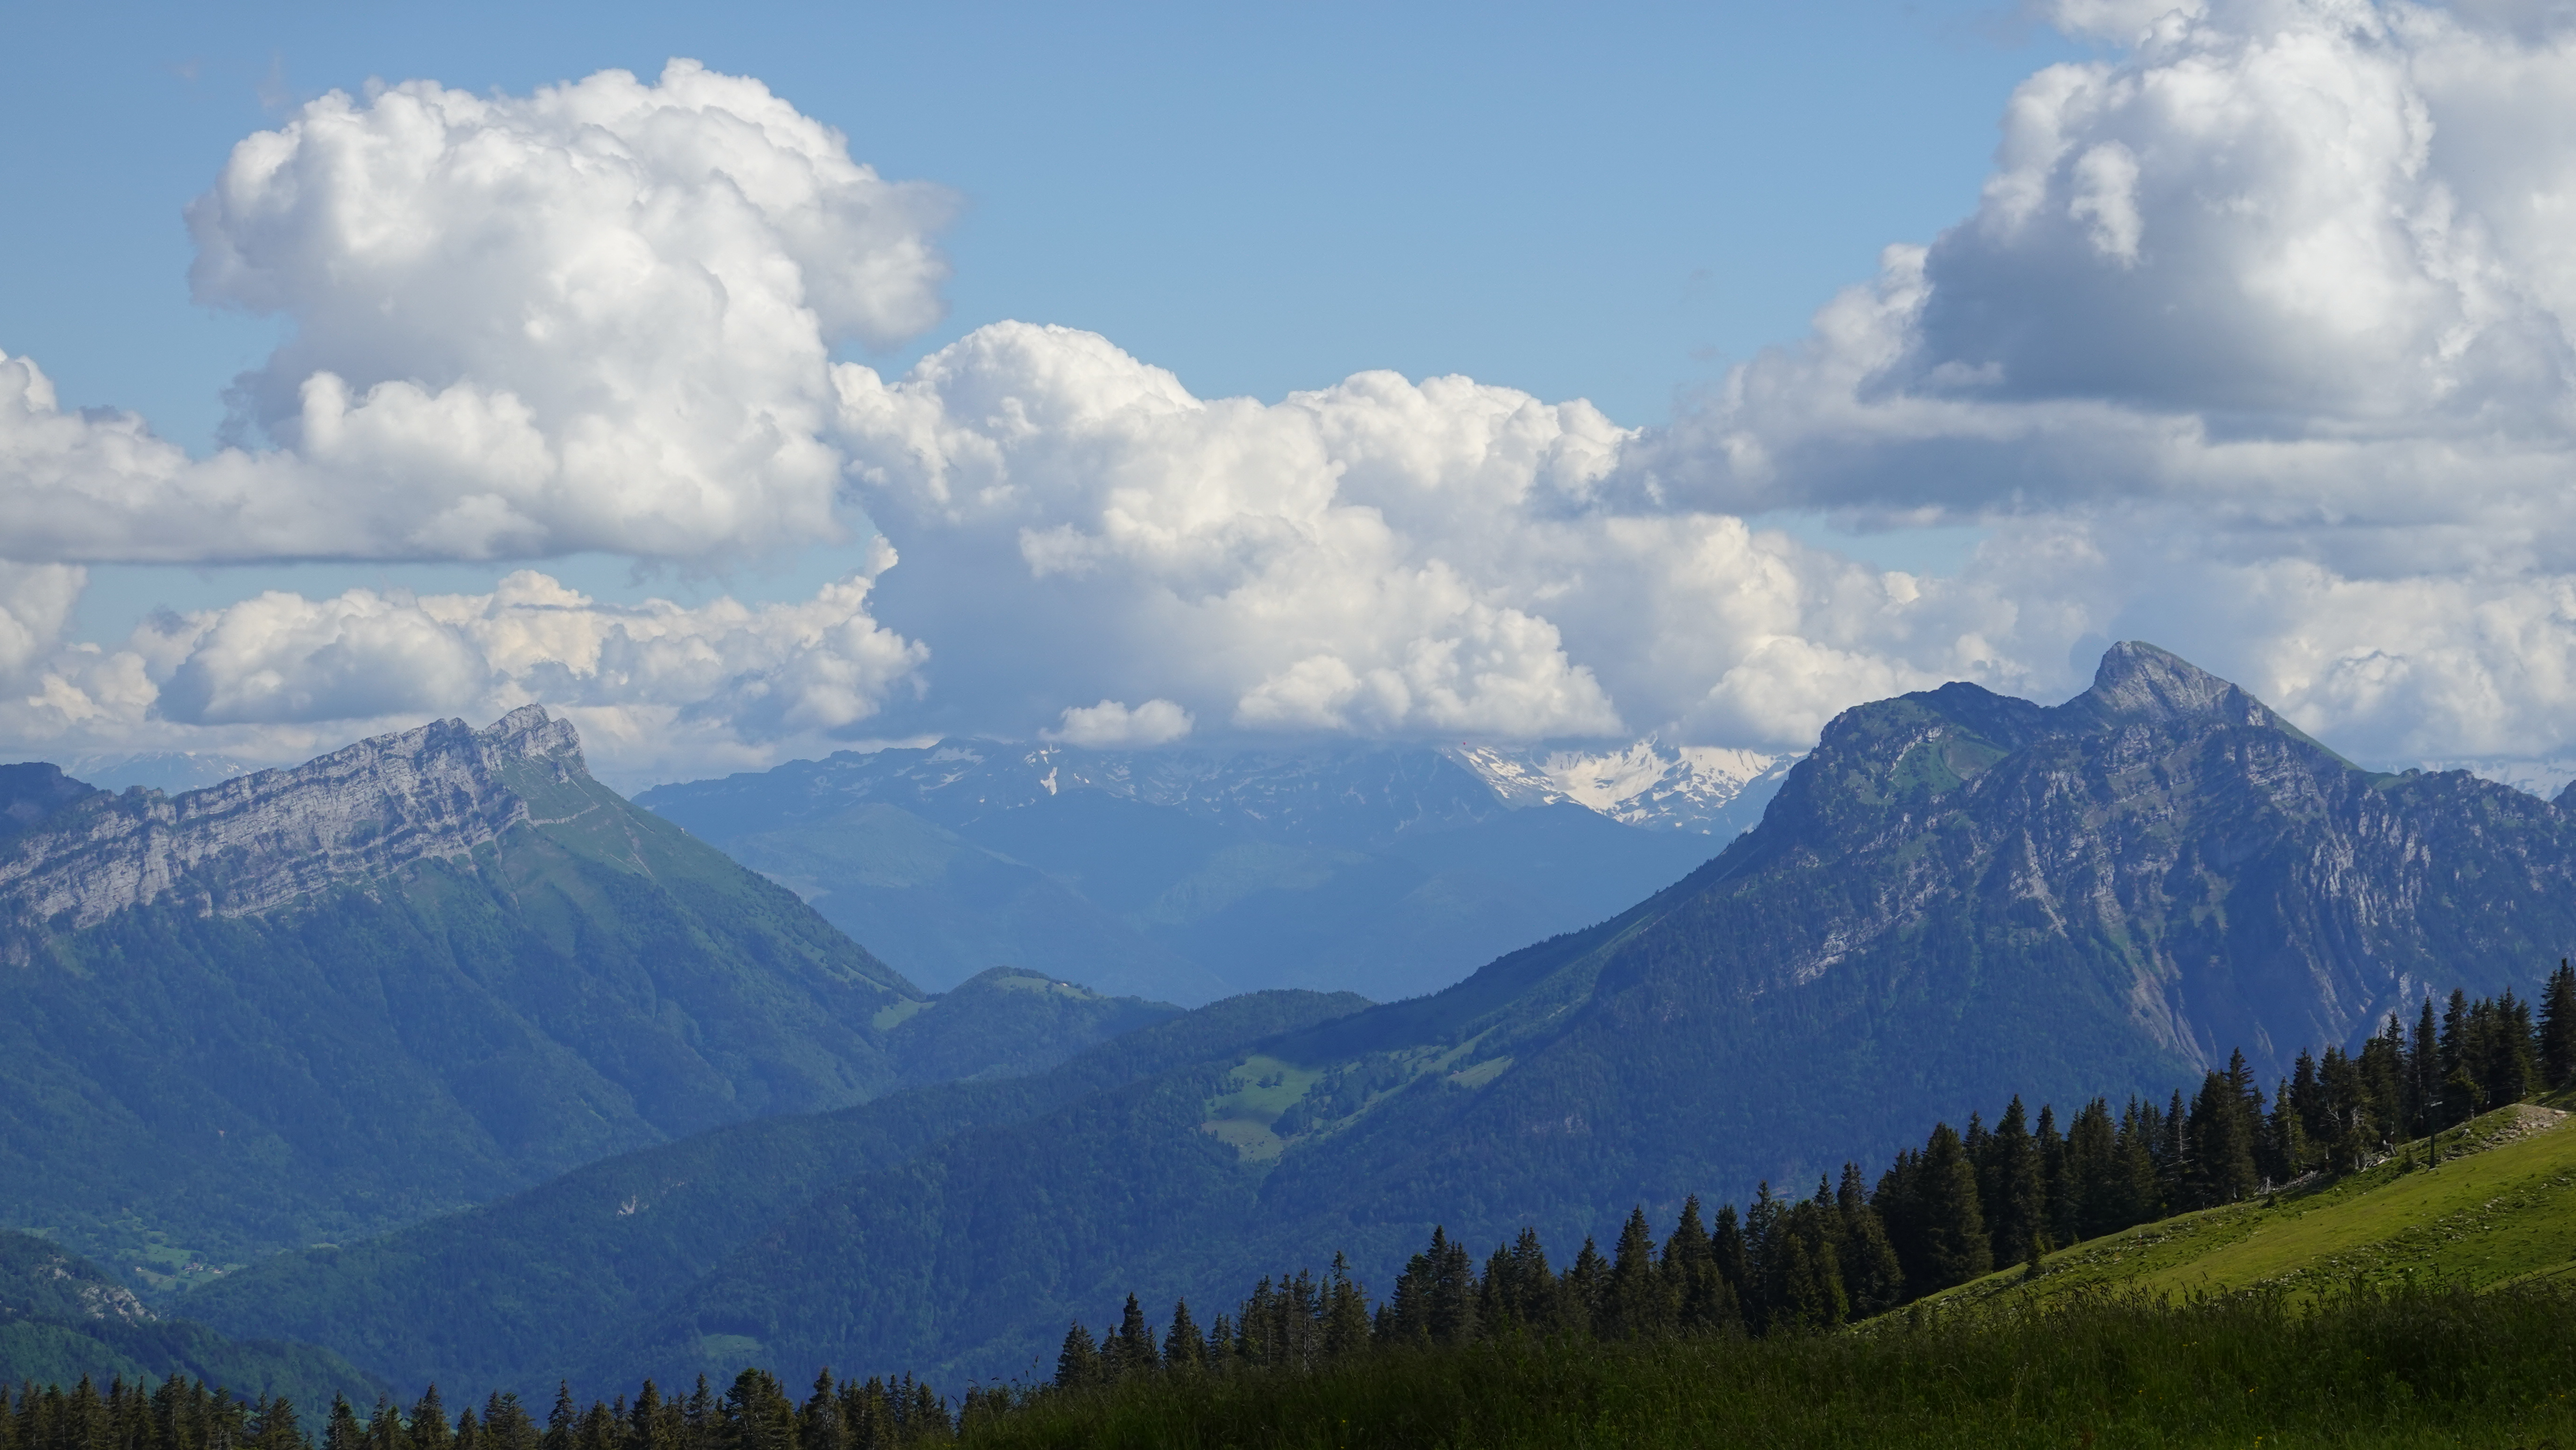 Windows Backgrounds trees, mountains, landscape, nature, meadow